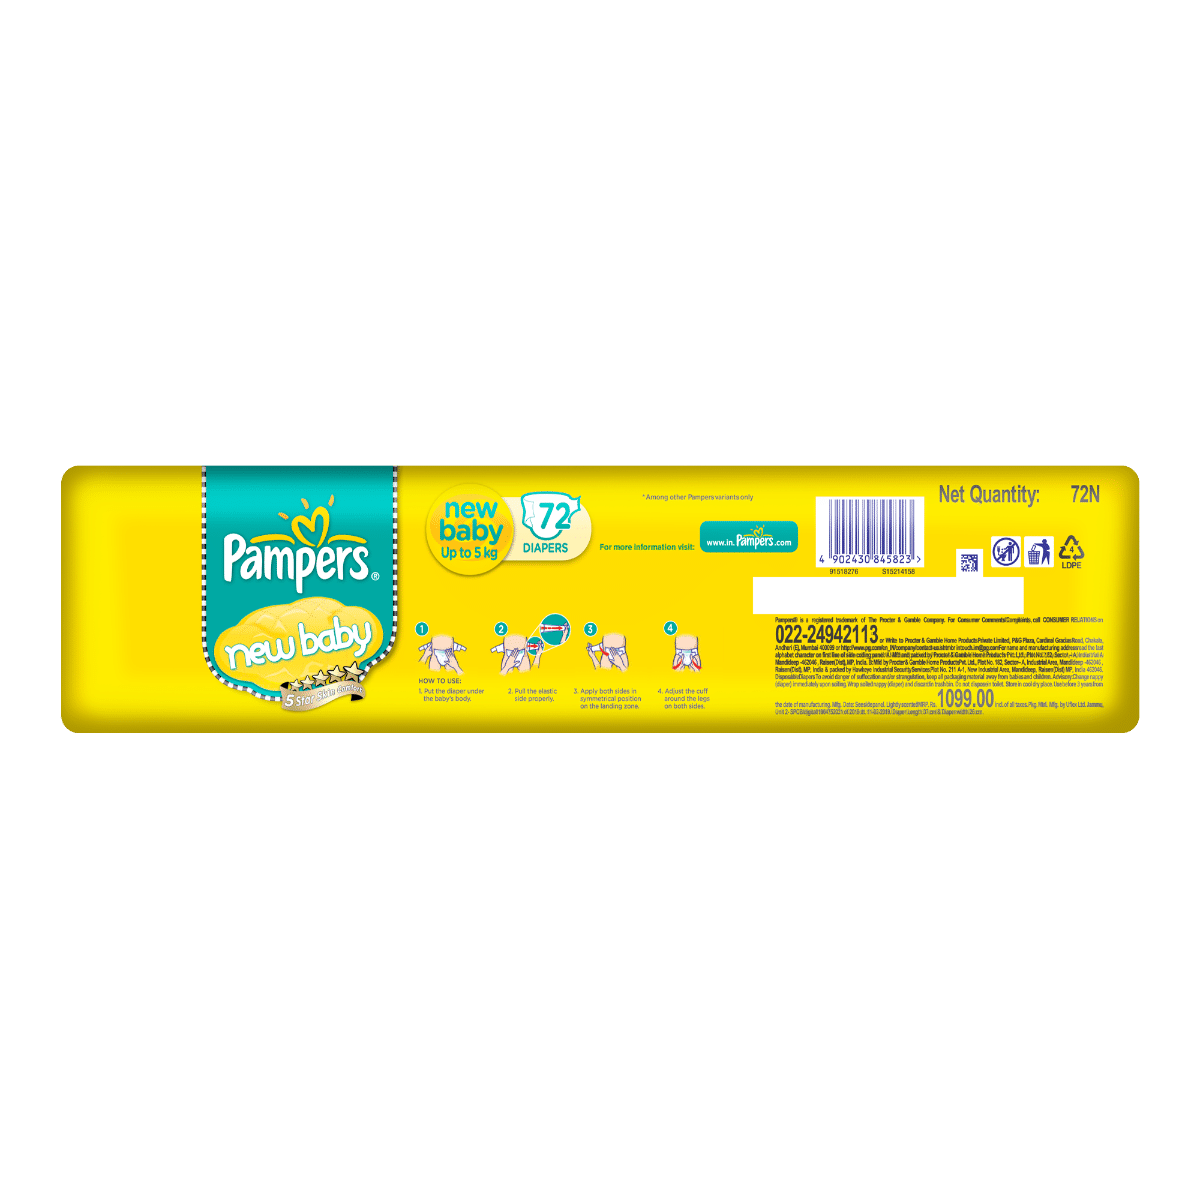 Pampers New Baby Diapers, 72 Count, Pack of 1 